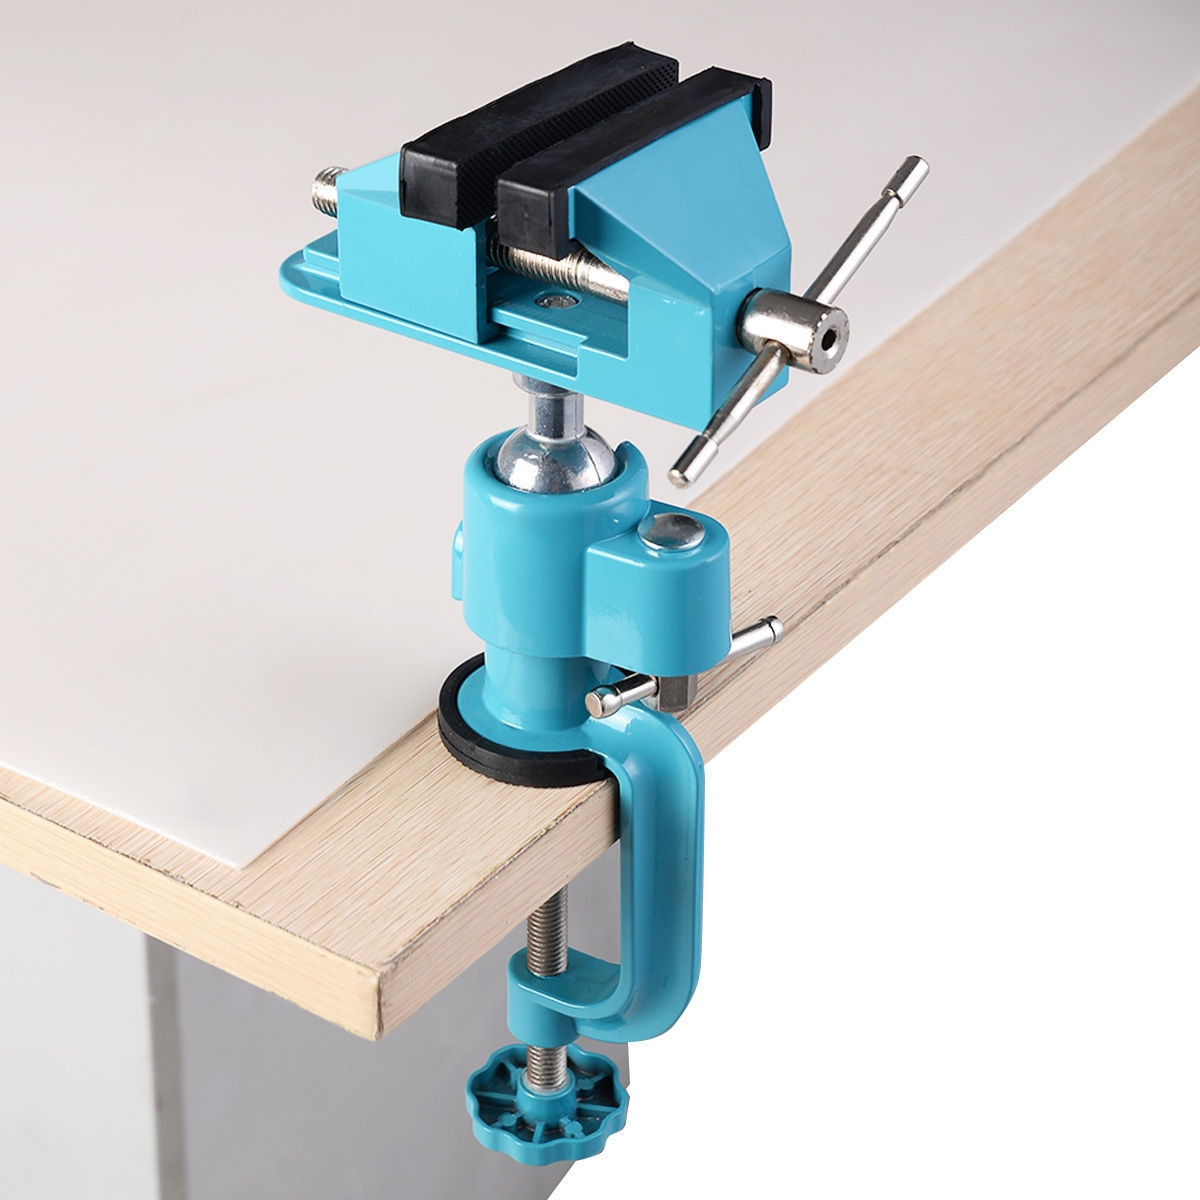 Goplus Bench Vise Swivel 3 In. Tabletop Clamp Vice Tilts Rotate 360° Universal Work